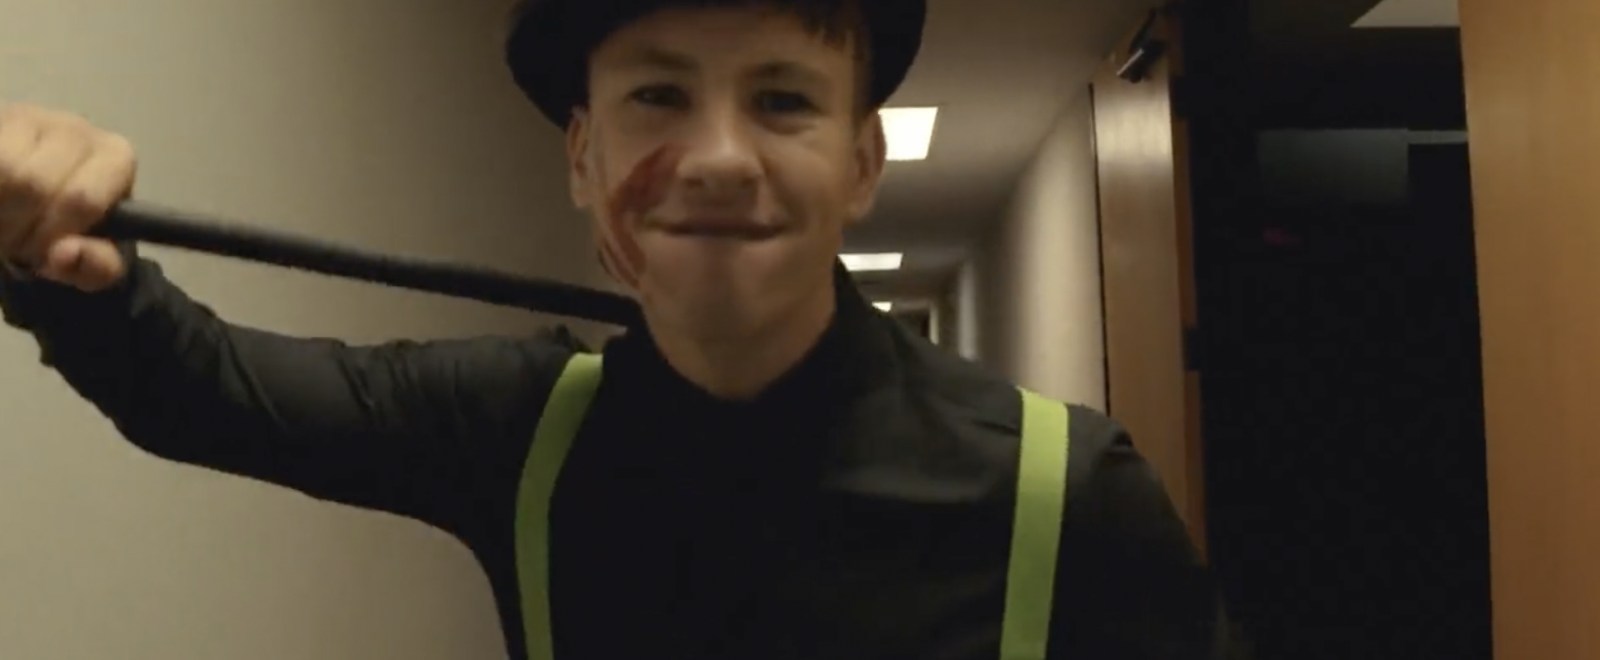 WATCH] Barry Keoghan Audition Video For 'The Batman' Joker